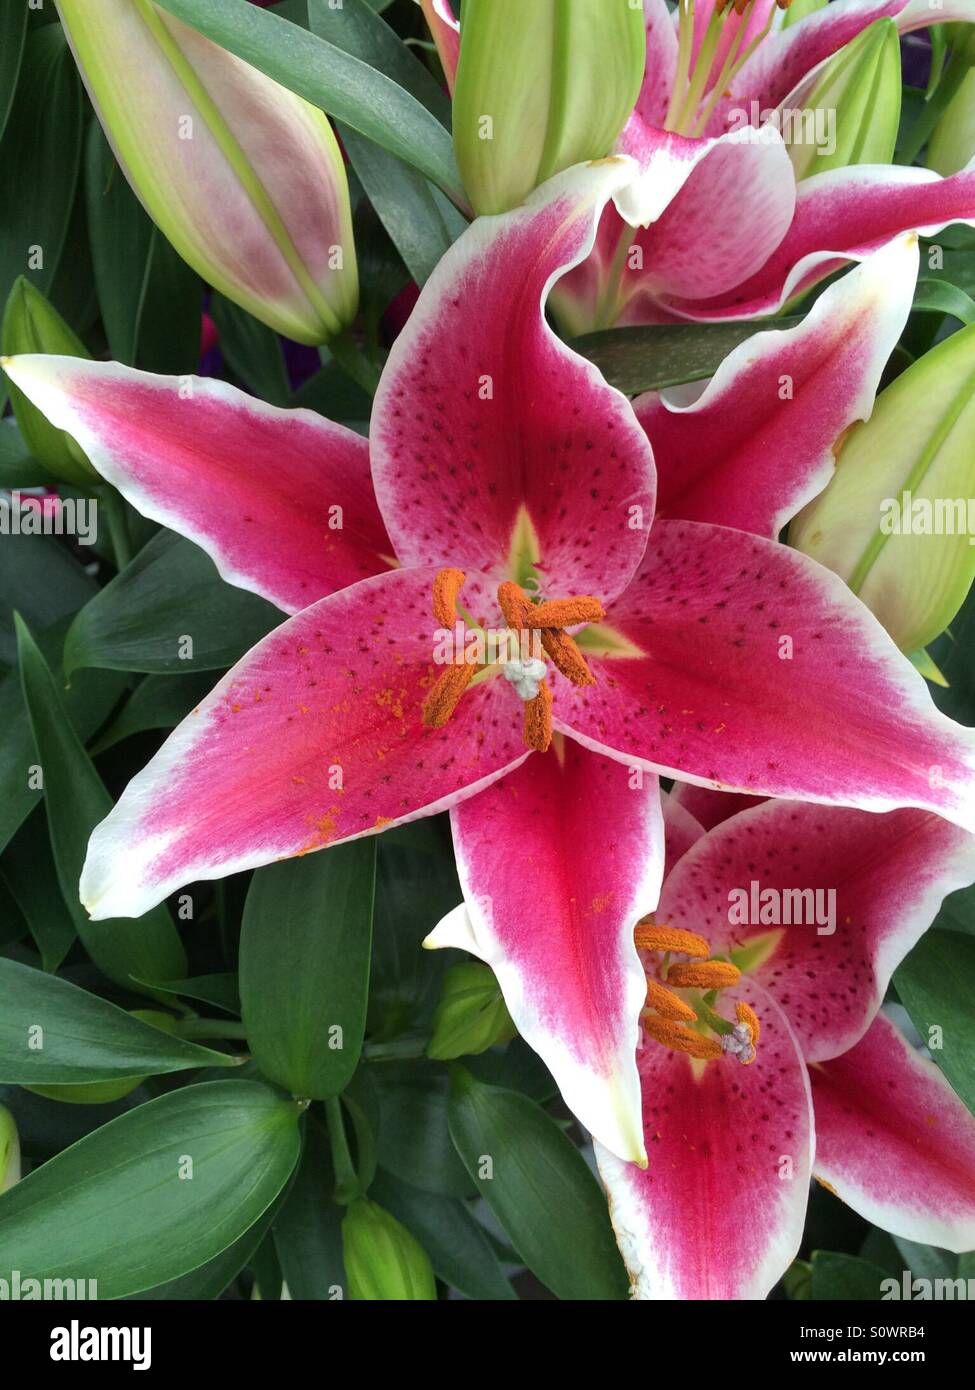 Bright pink lilies against green leaves Stock Photo